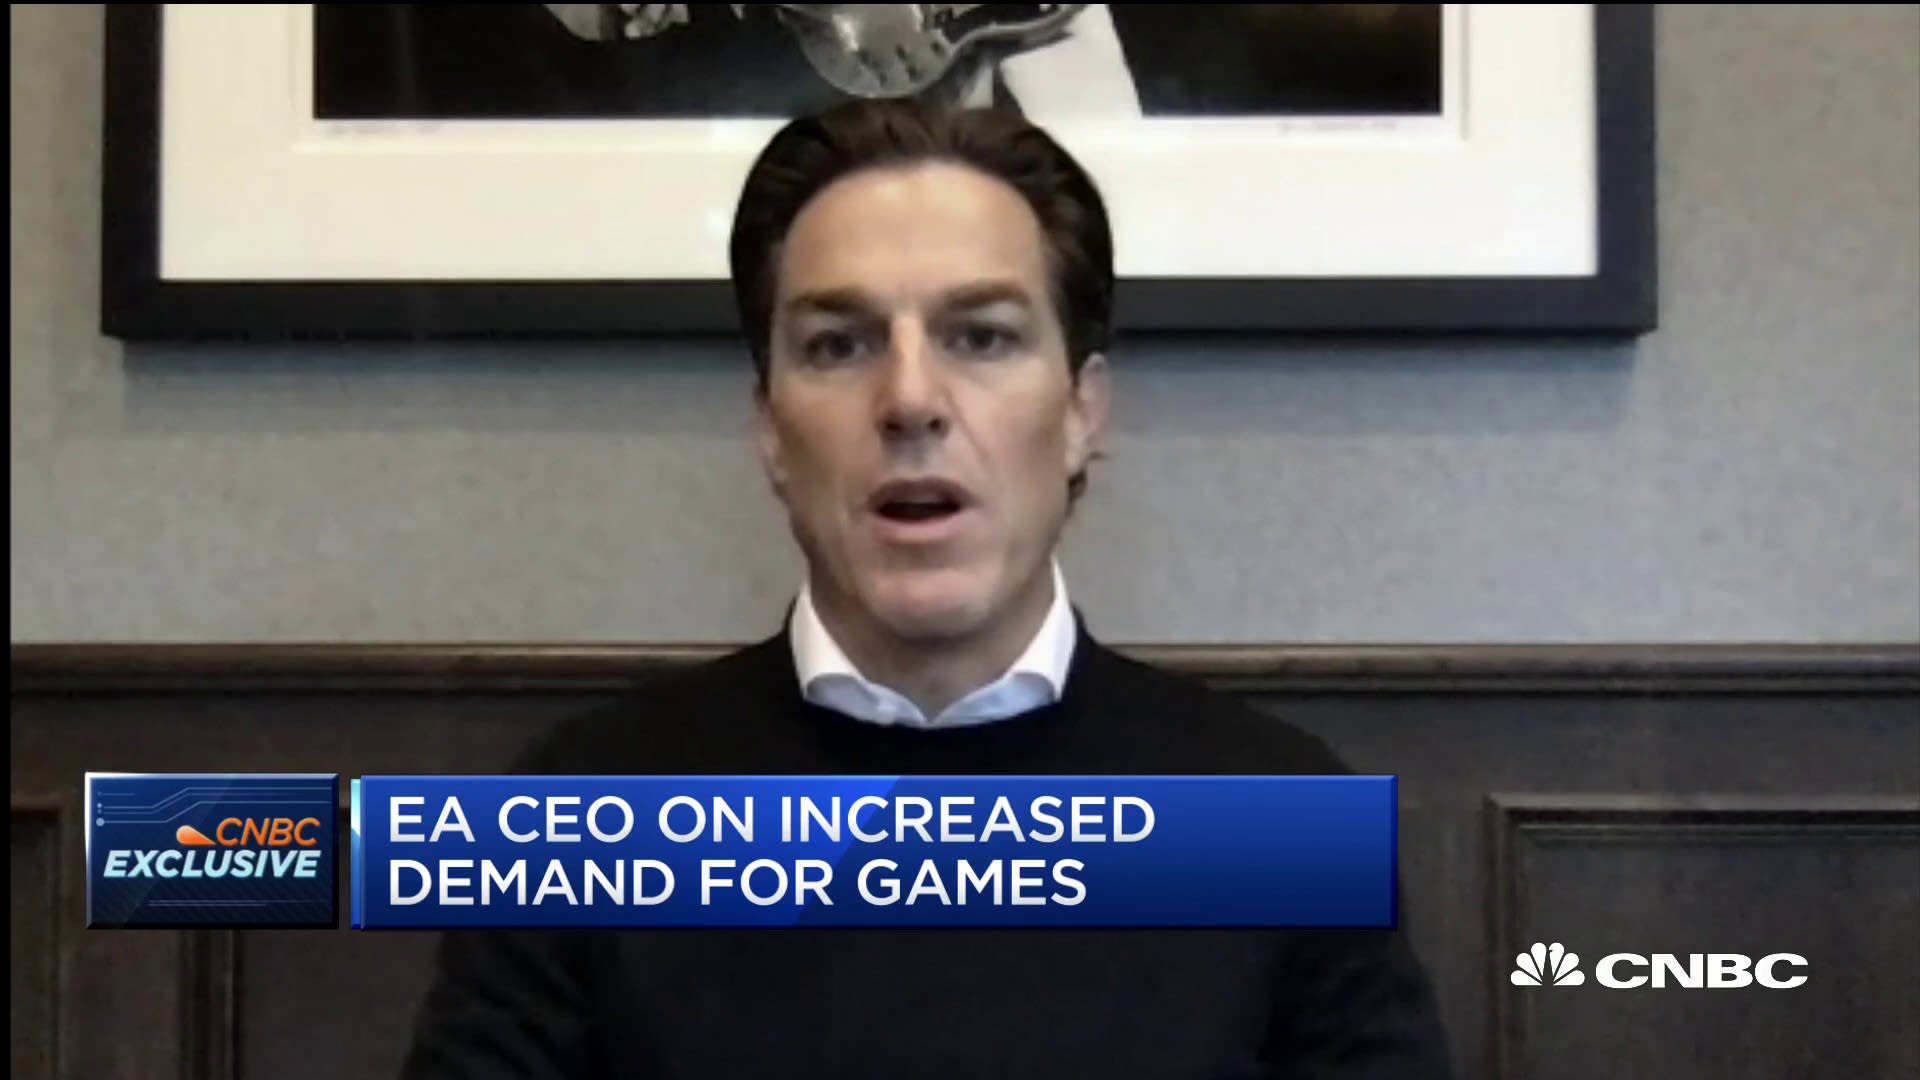 Watch CNBC's full interview with Electronic Arts CEO Andrew Wilson